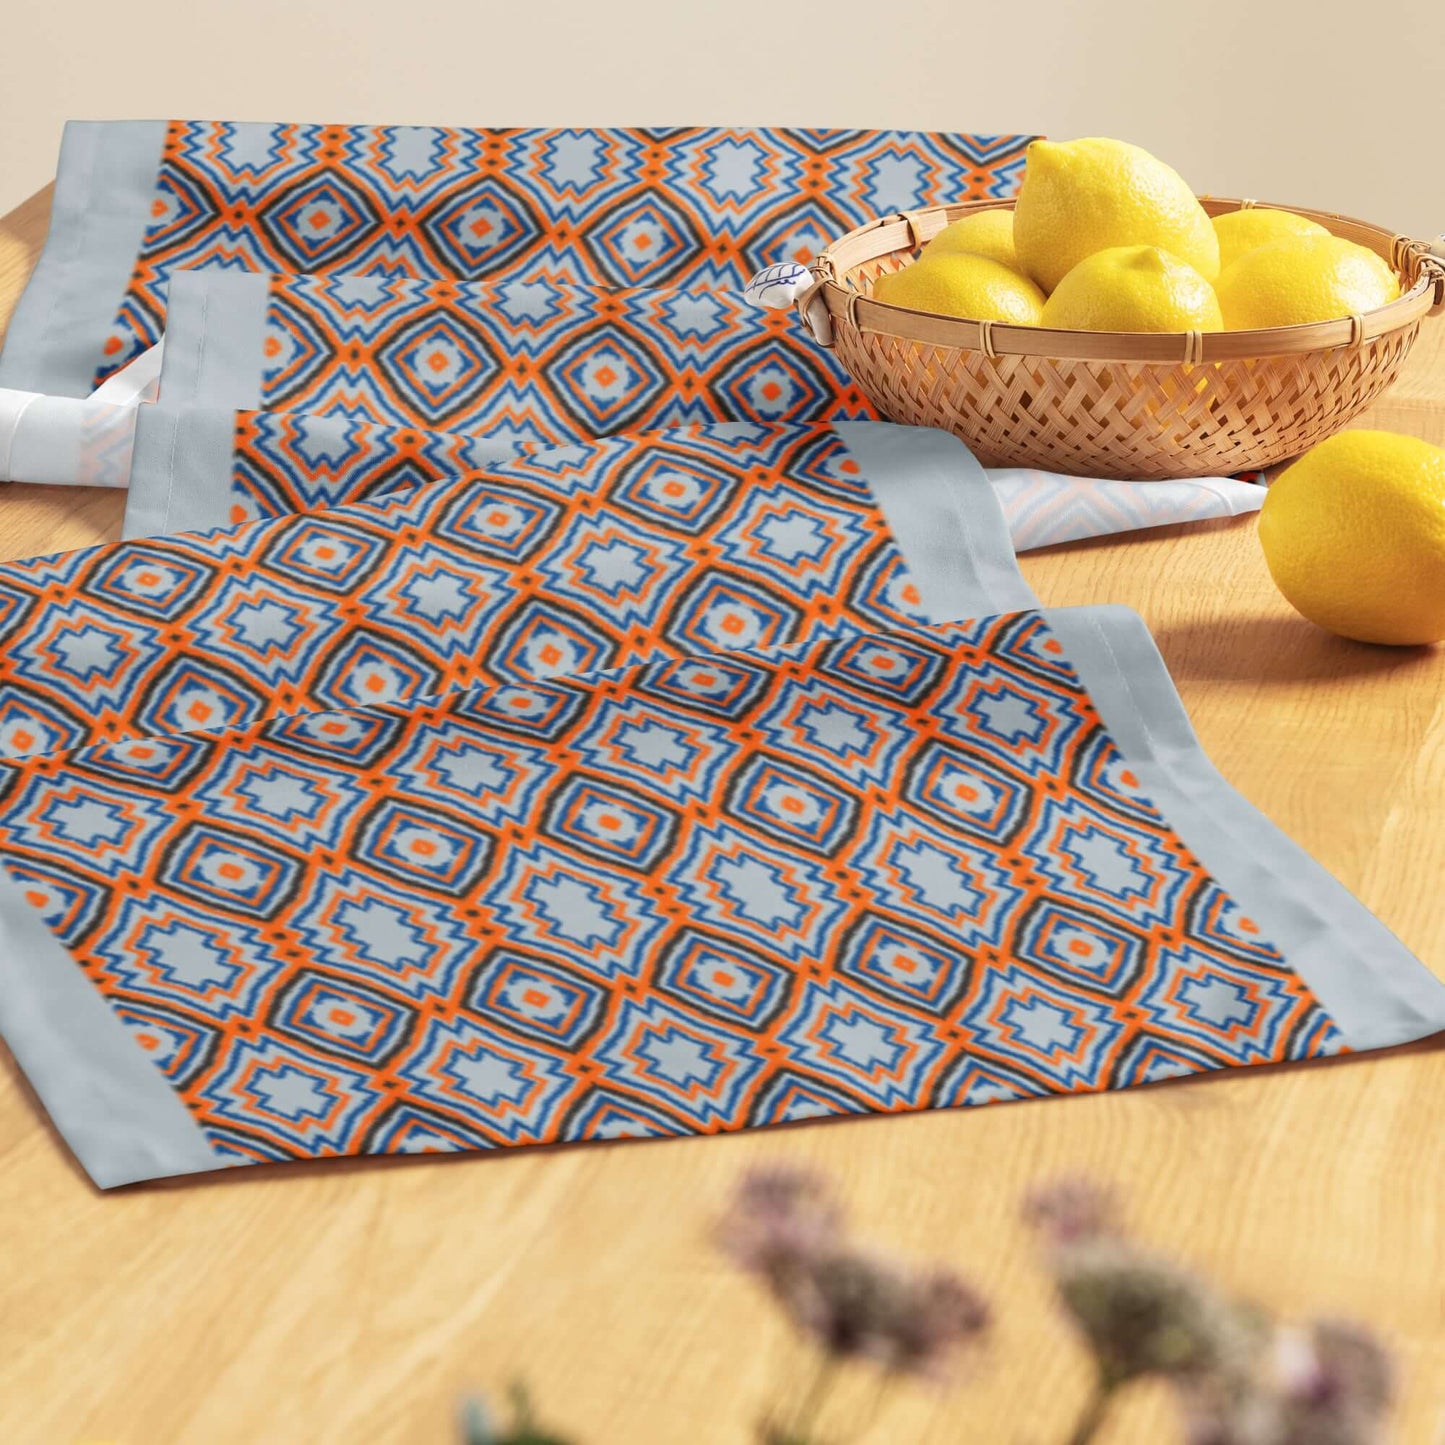 Gold table runner with a basket of lemons